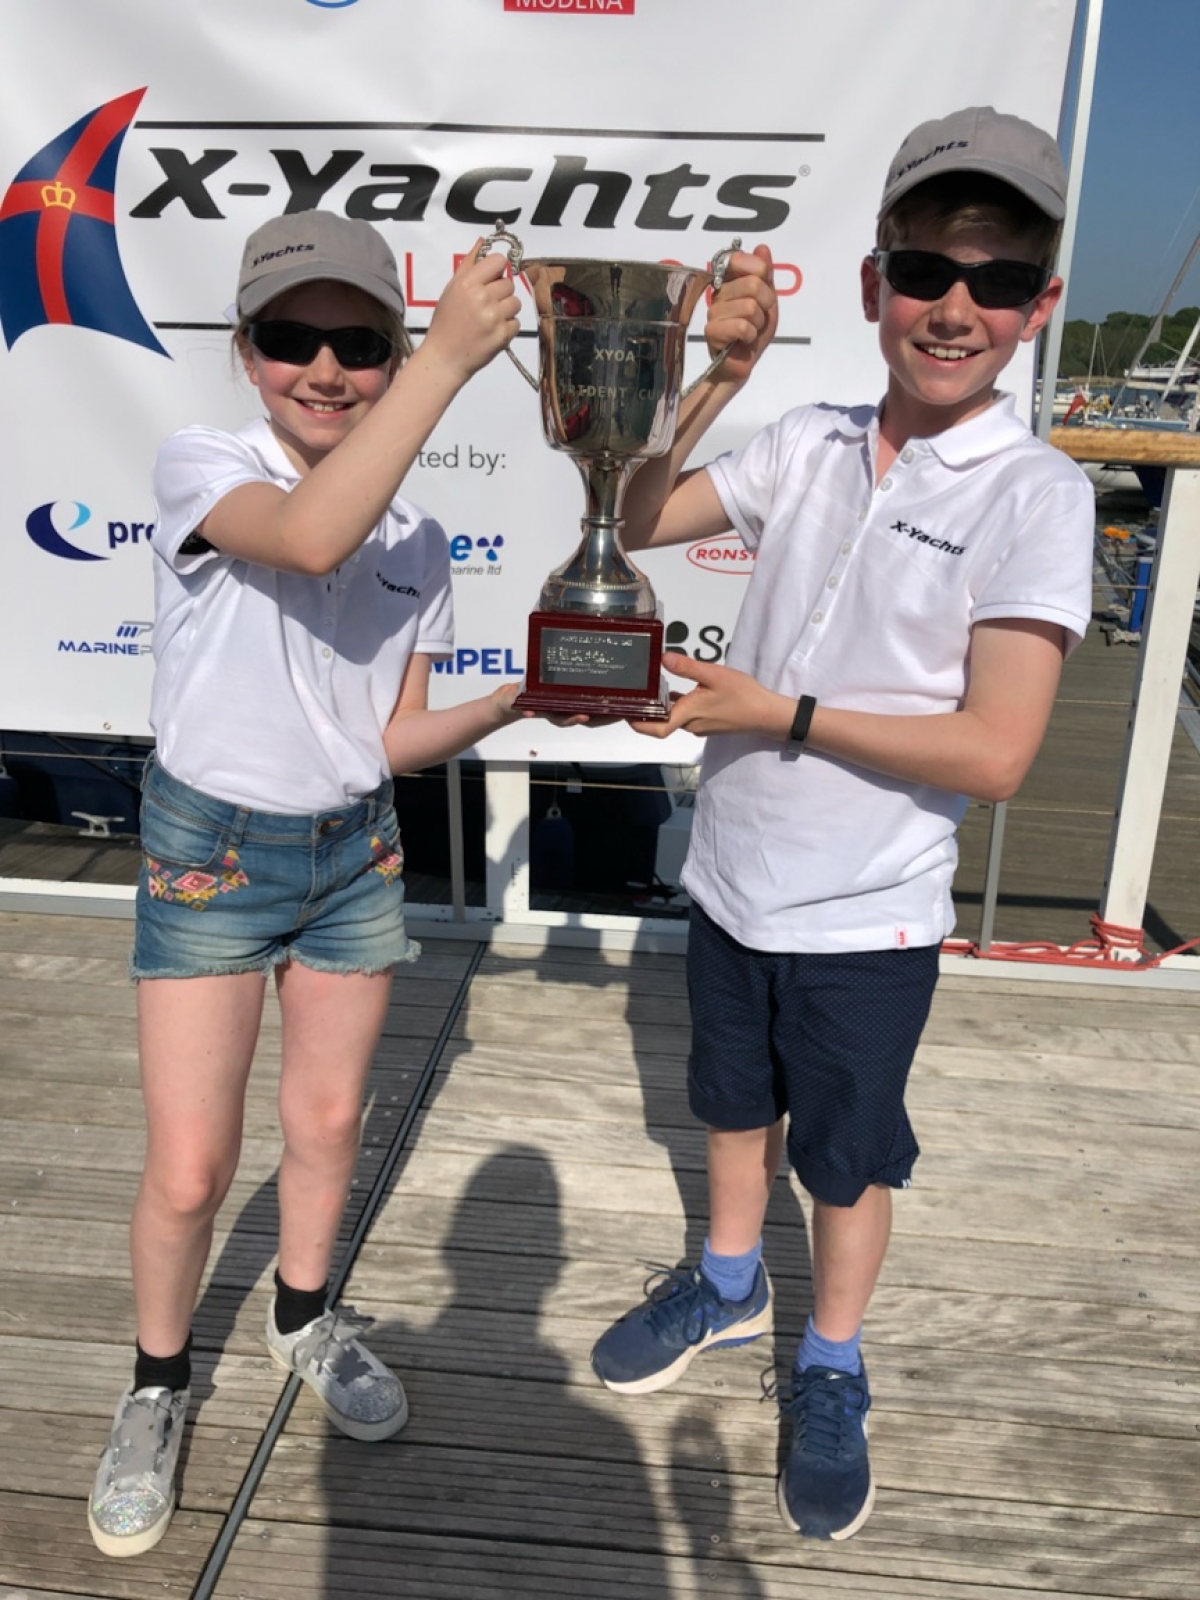 minX wins X-Yachts Solent Cup using Ultimate Sails